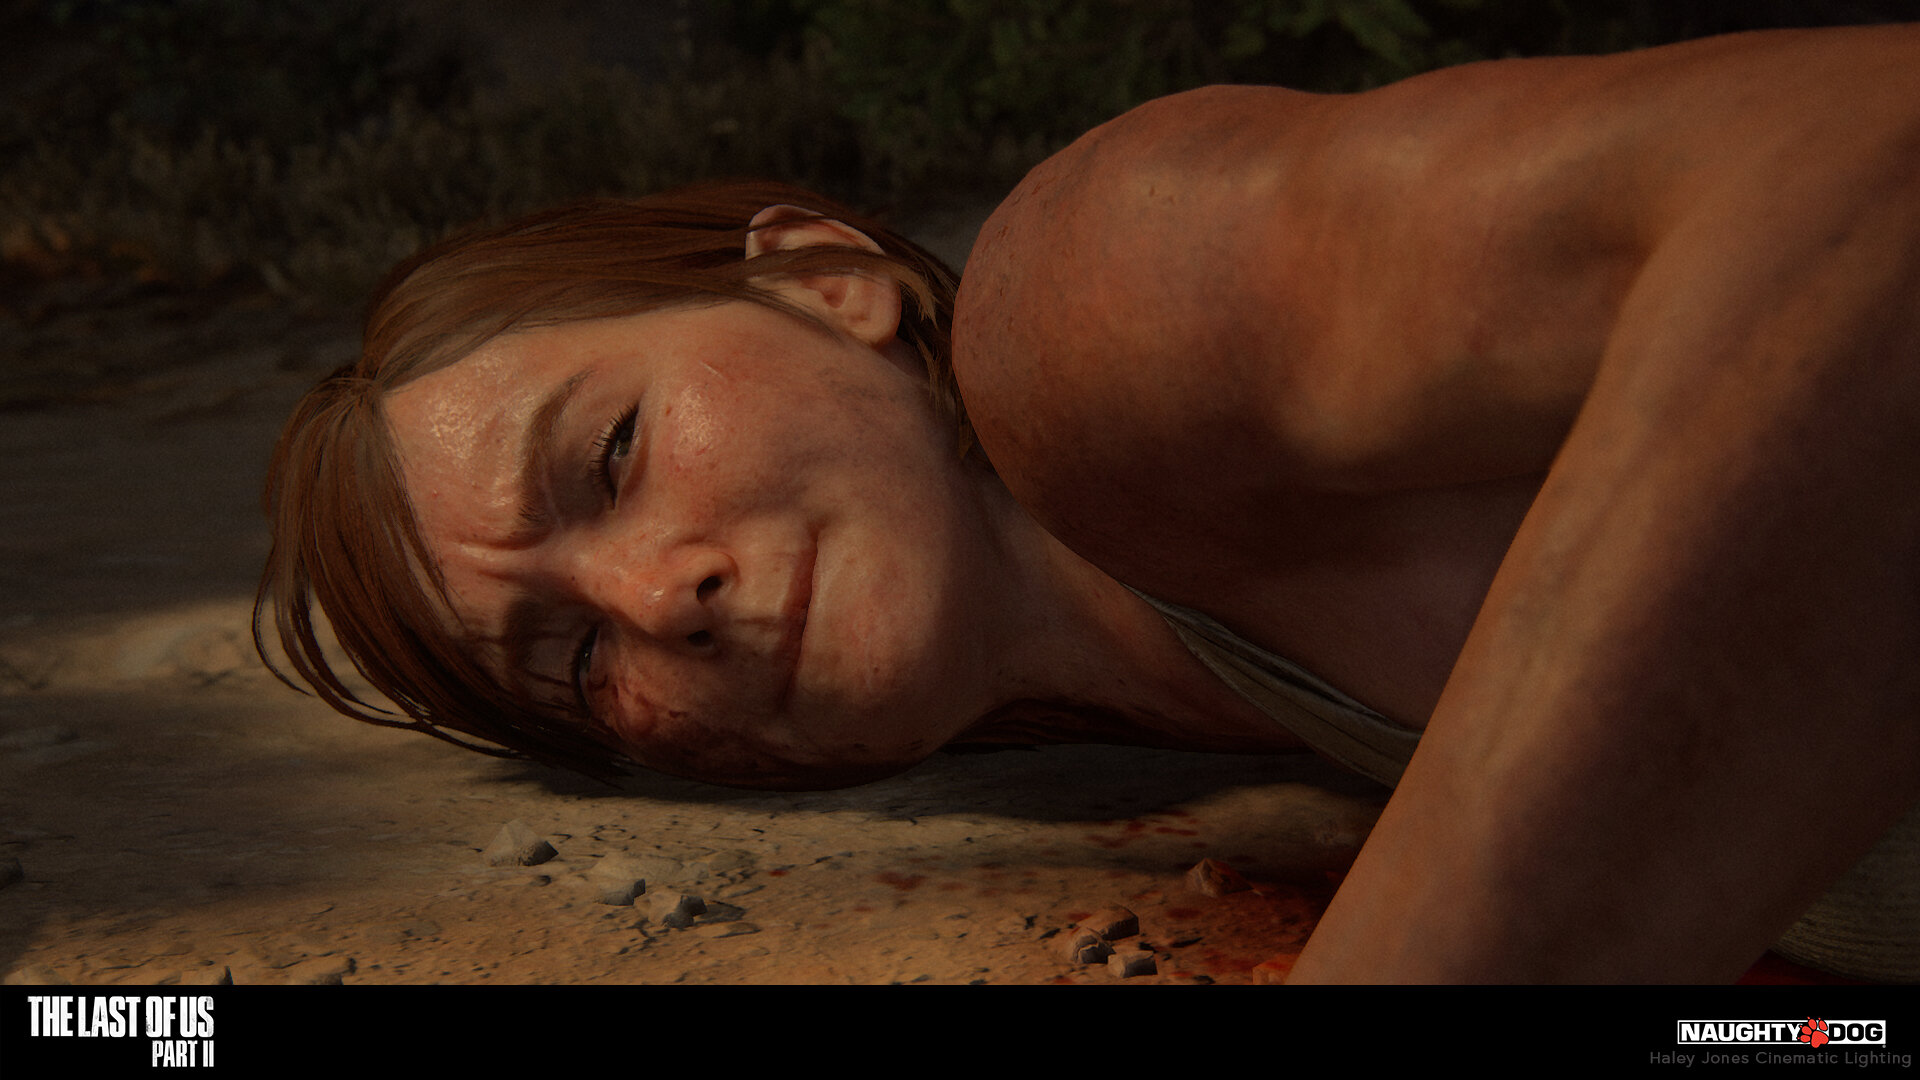 Ellie the last of us nackt